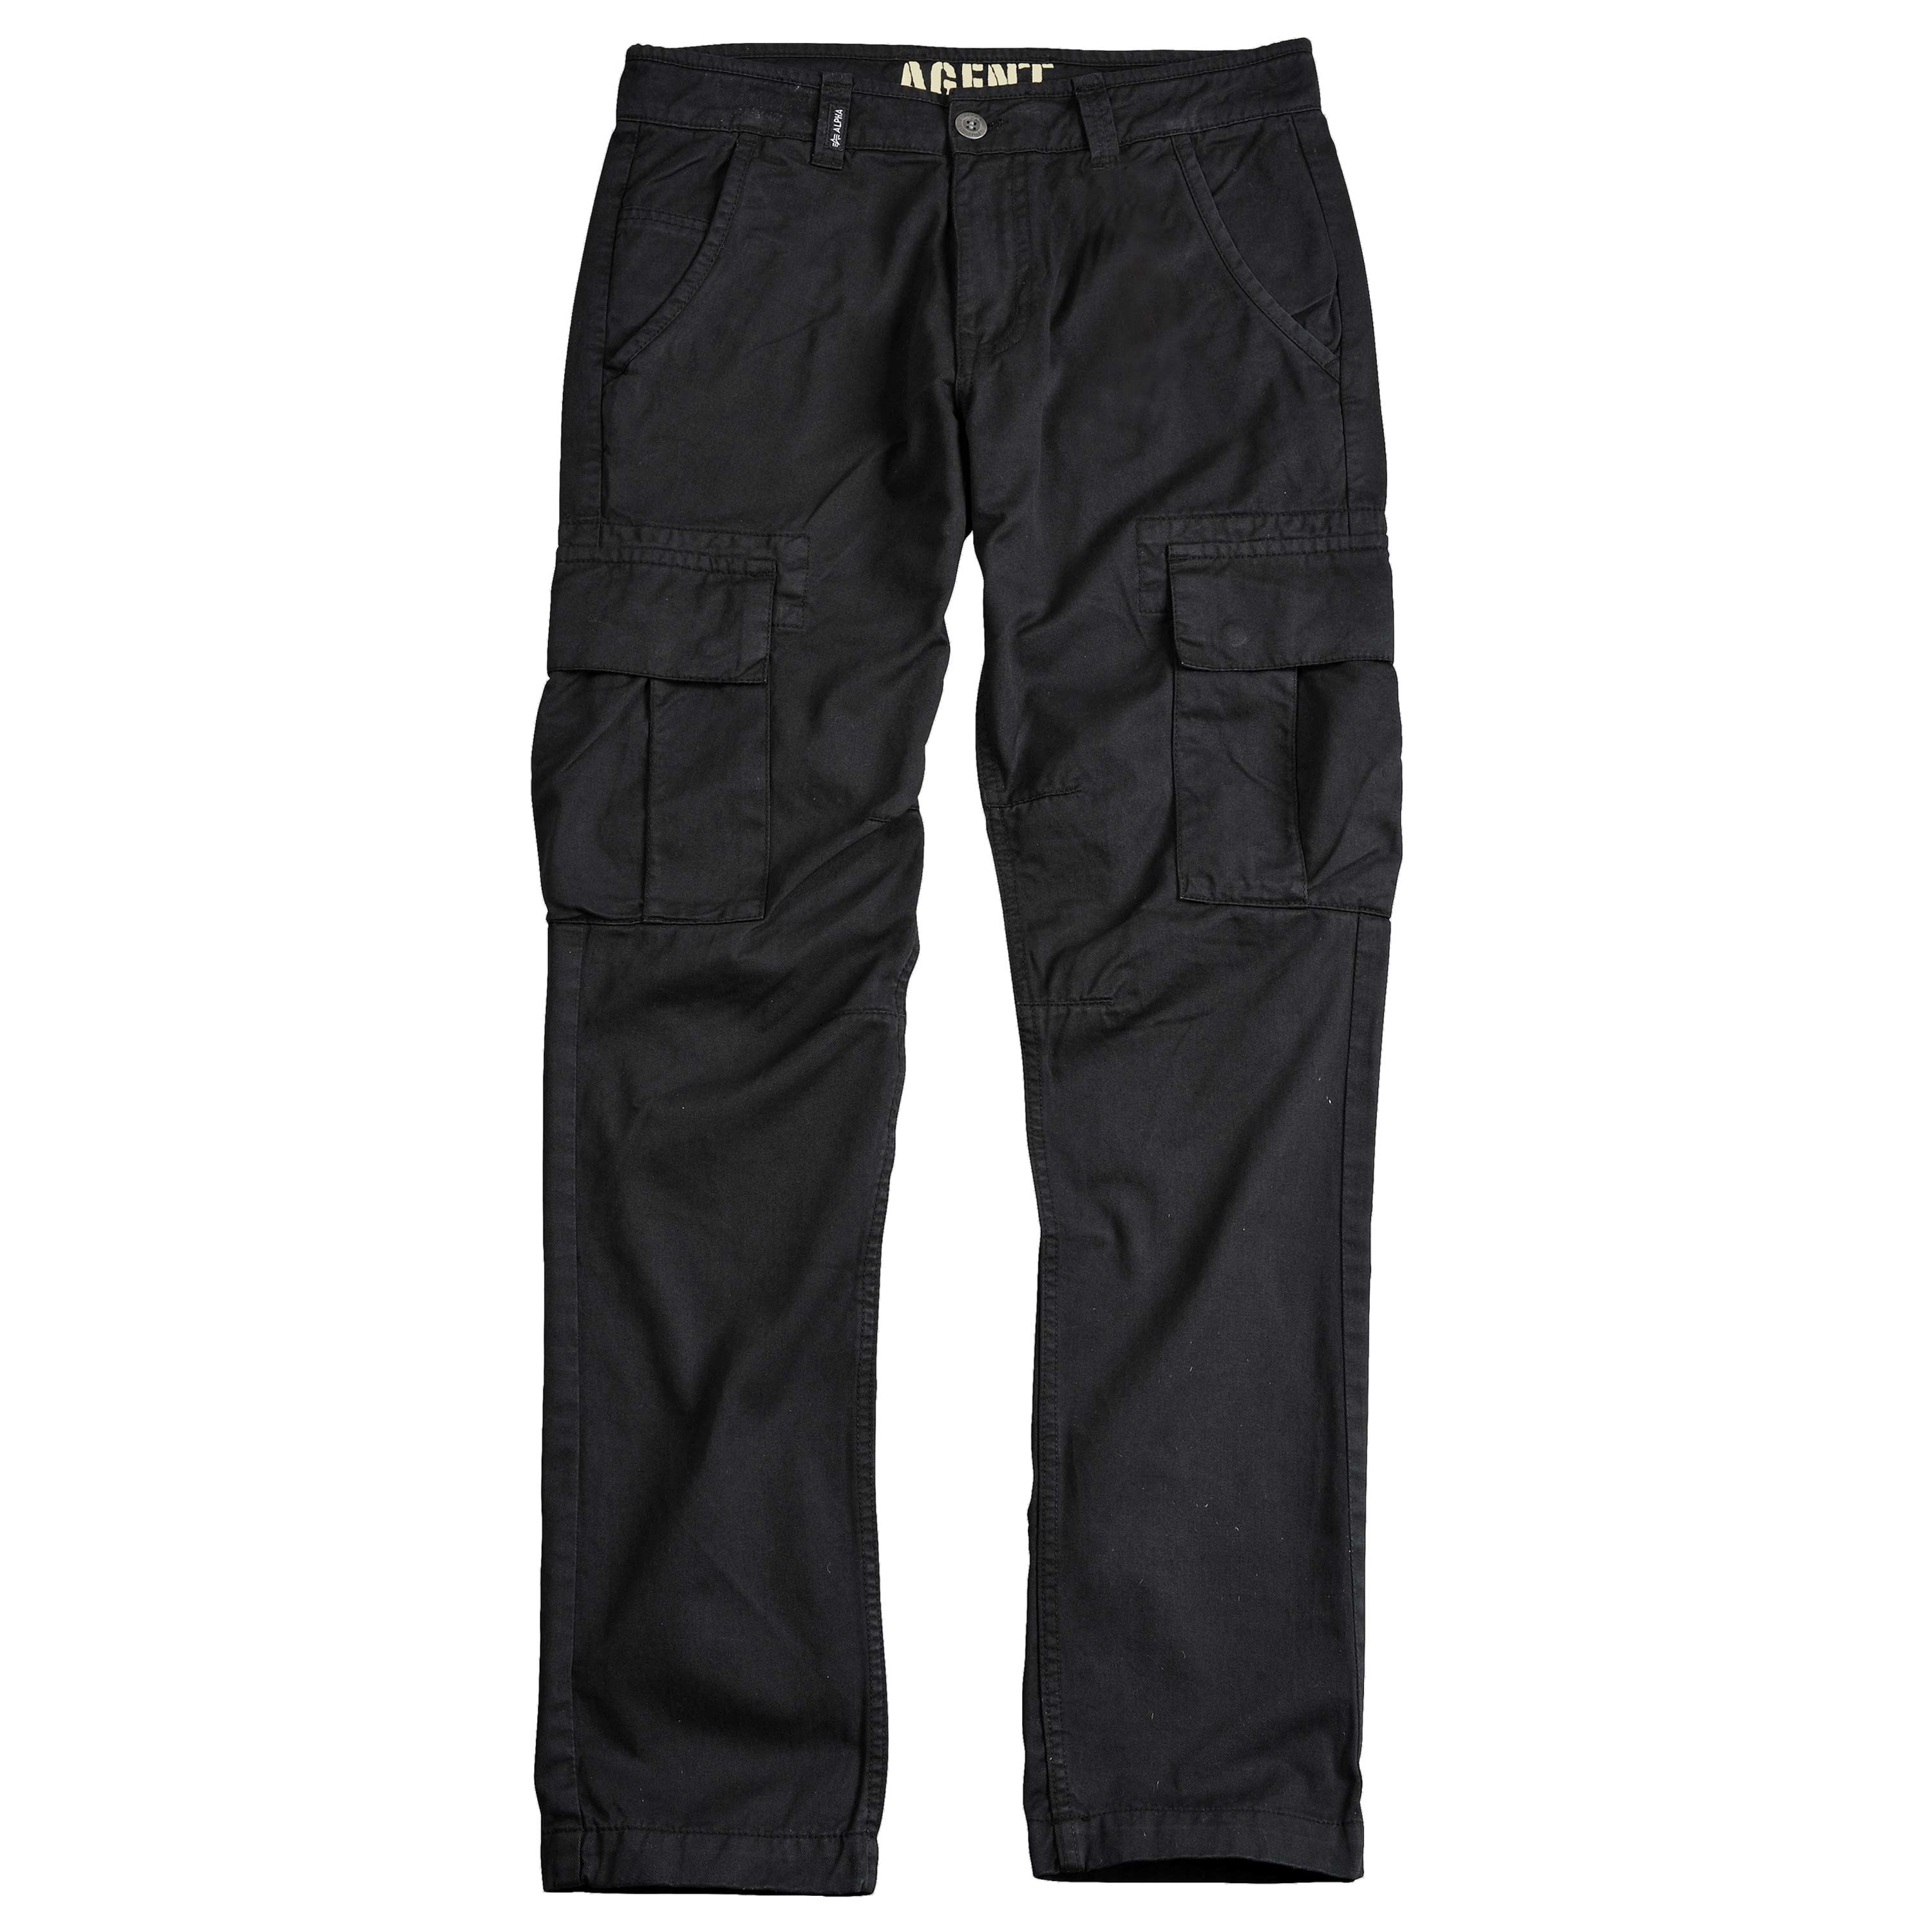 Agent by Alpha Purchase the ASMC Industries black Pants